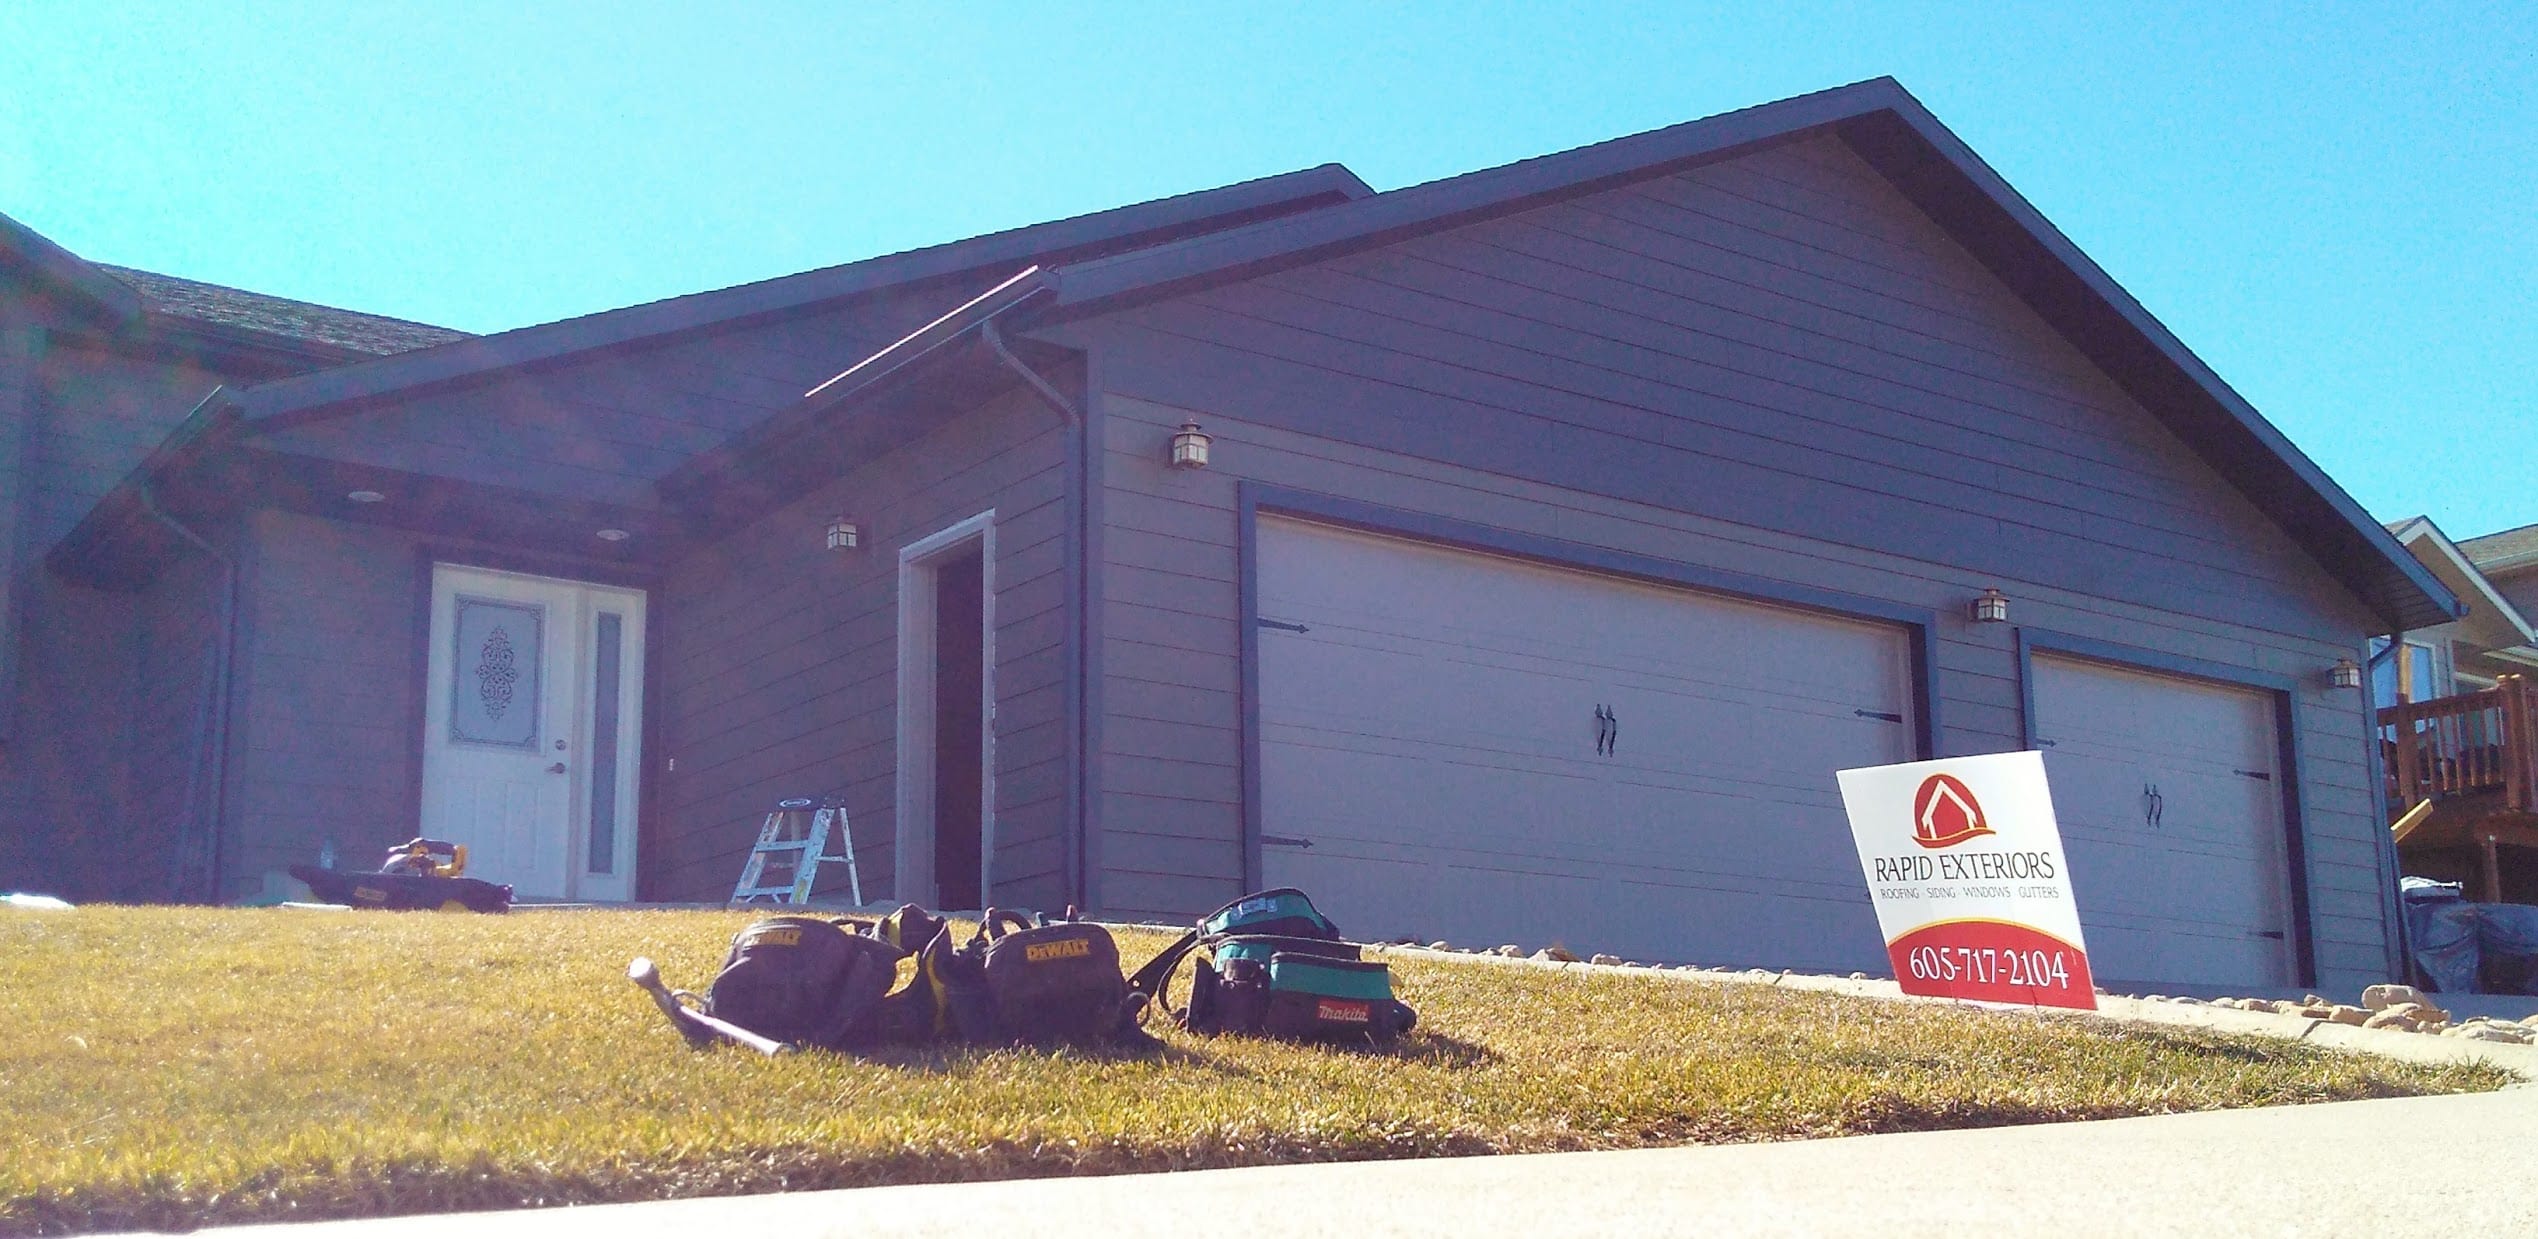 Rapid Exteriors - Roofing, Siding, Windows - Rapid City, SD, US, residential roofing contractors